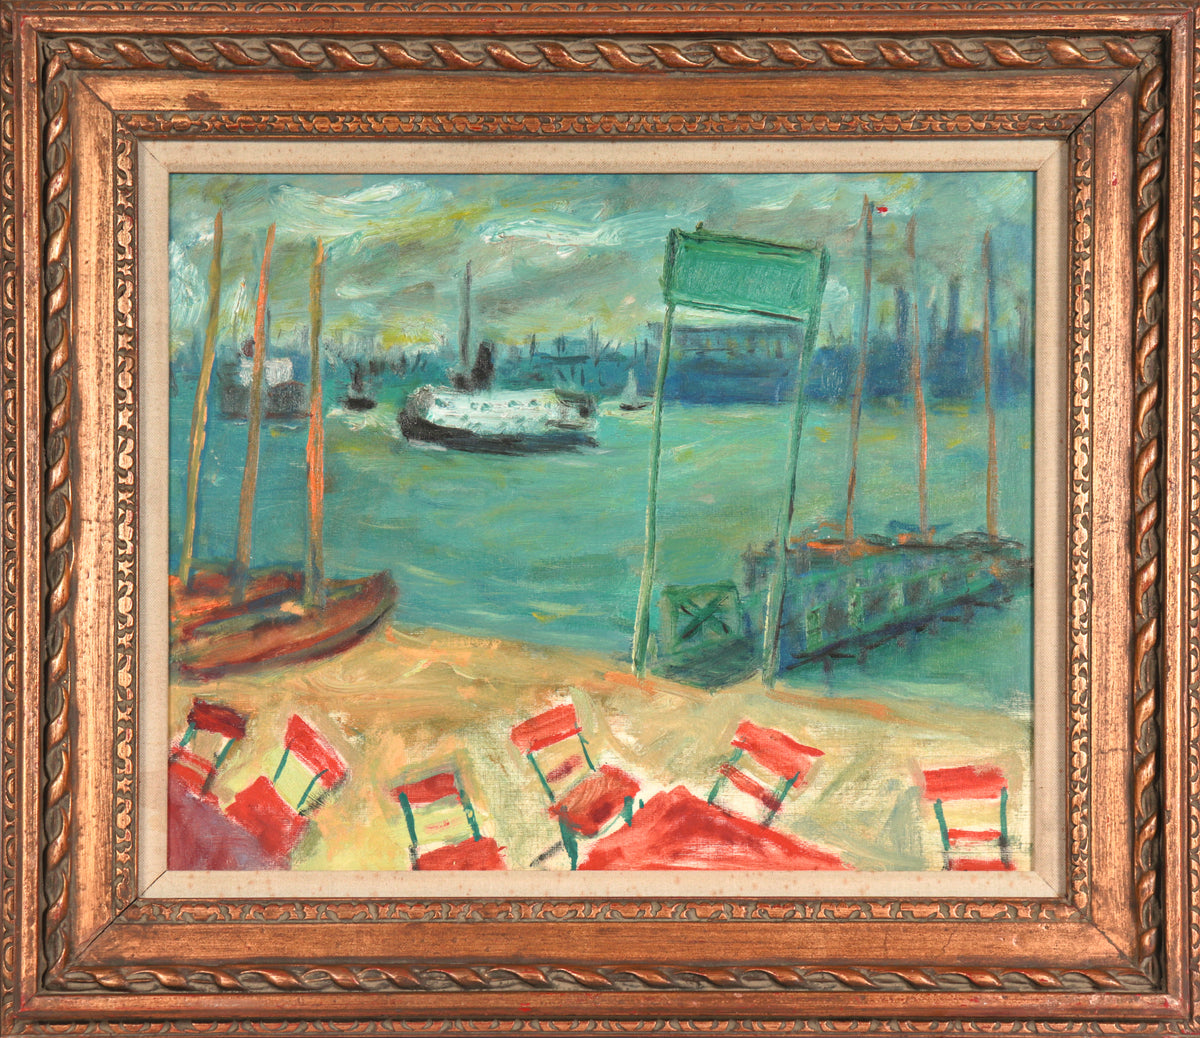 &lt;I&gt;Boothbay Harbor with Cafe Chairs&lt;/I&gt; &lt;br&gt;1971 Oil on Paper&lt;br&gt;&lt;br&gt;#C5117